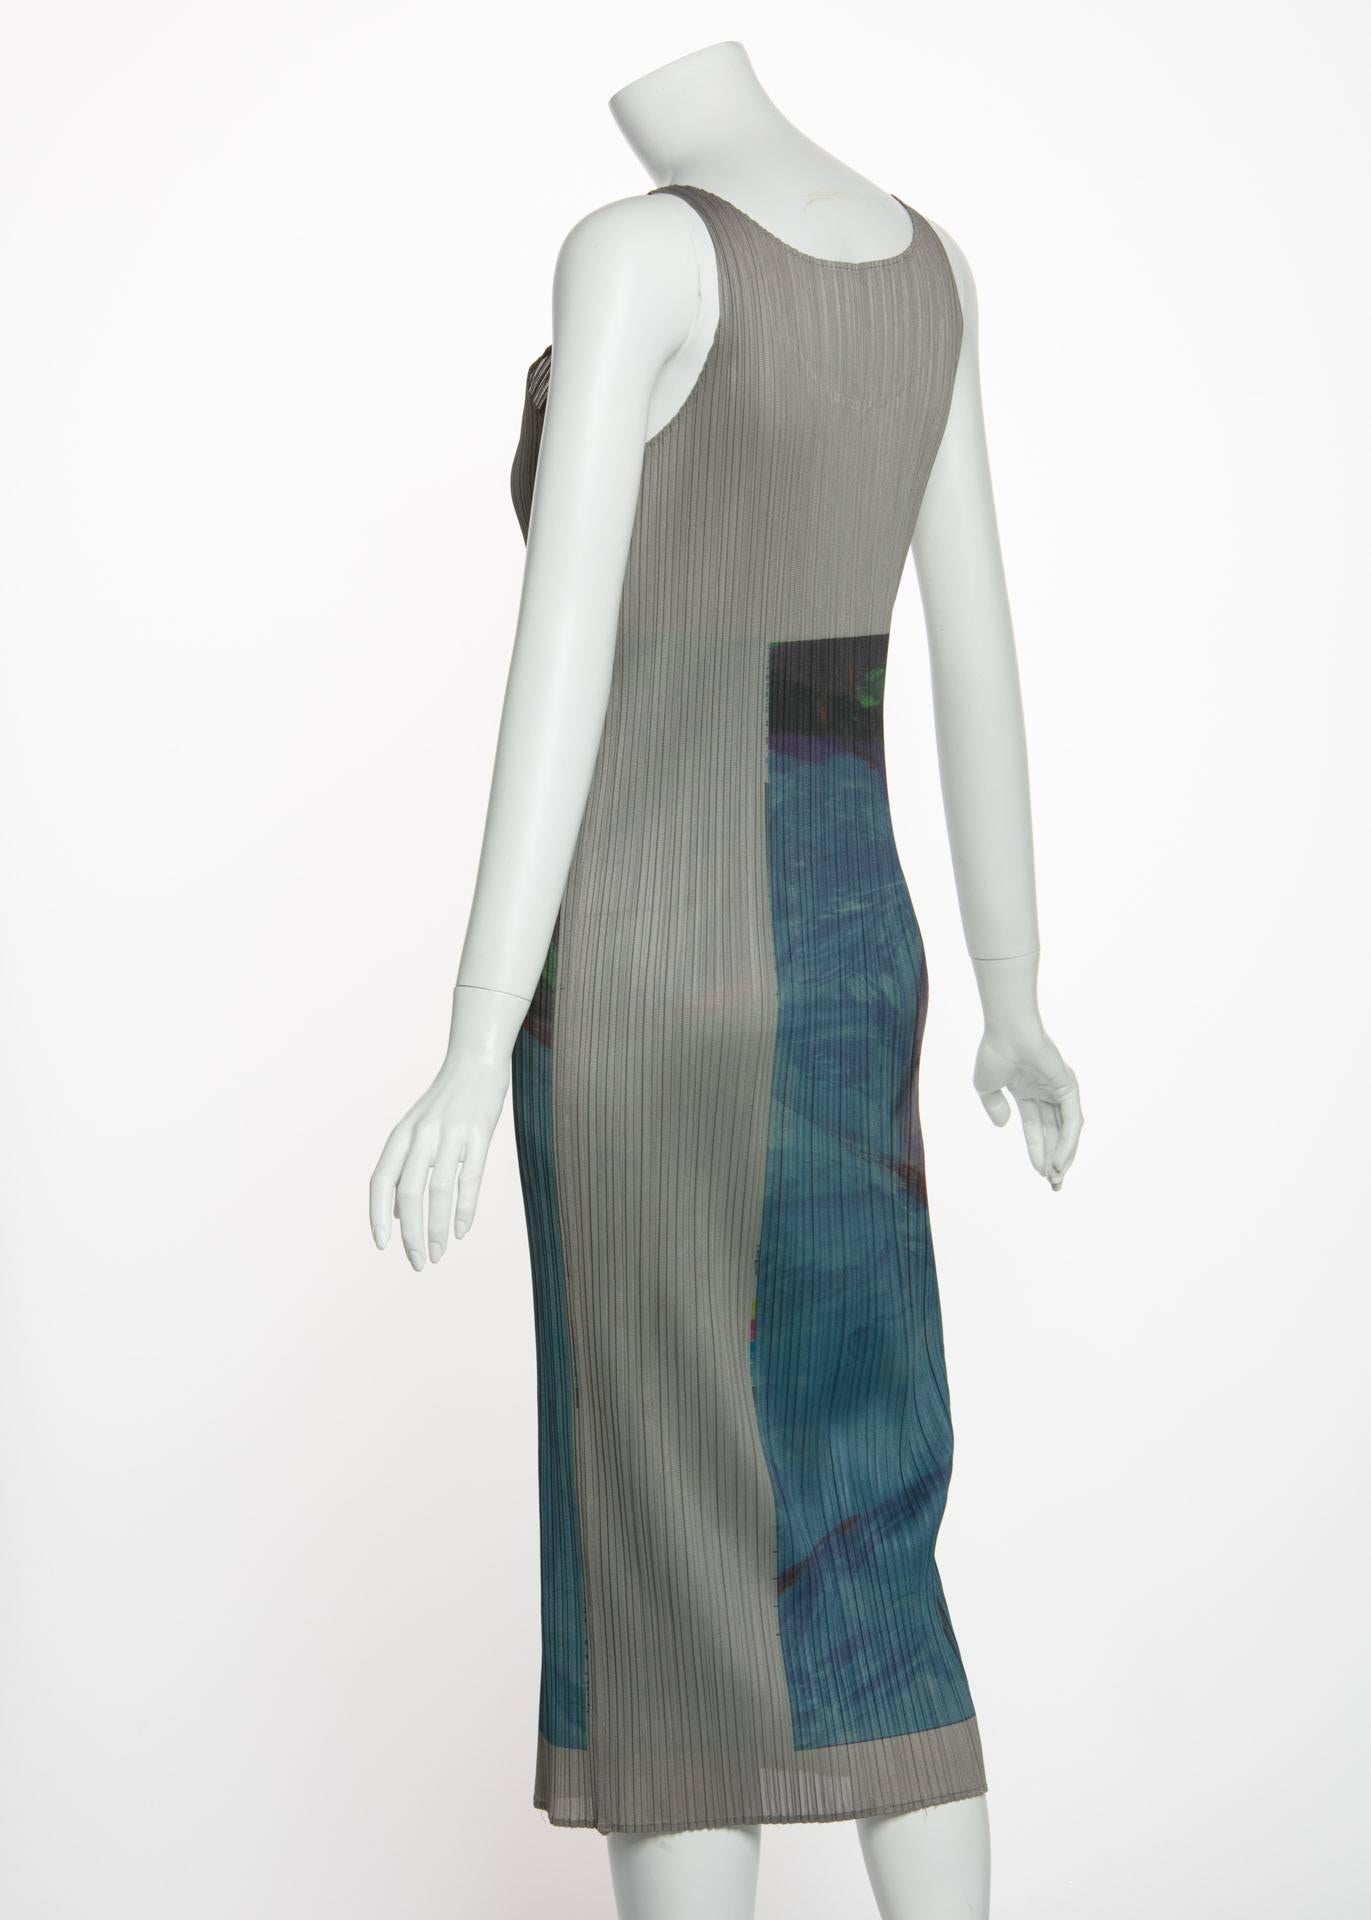 Issey Miyake Guest Artist Series No 2 Pleated Dress, 1997 at 1stDibs